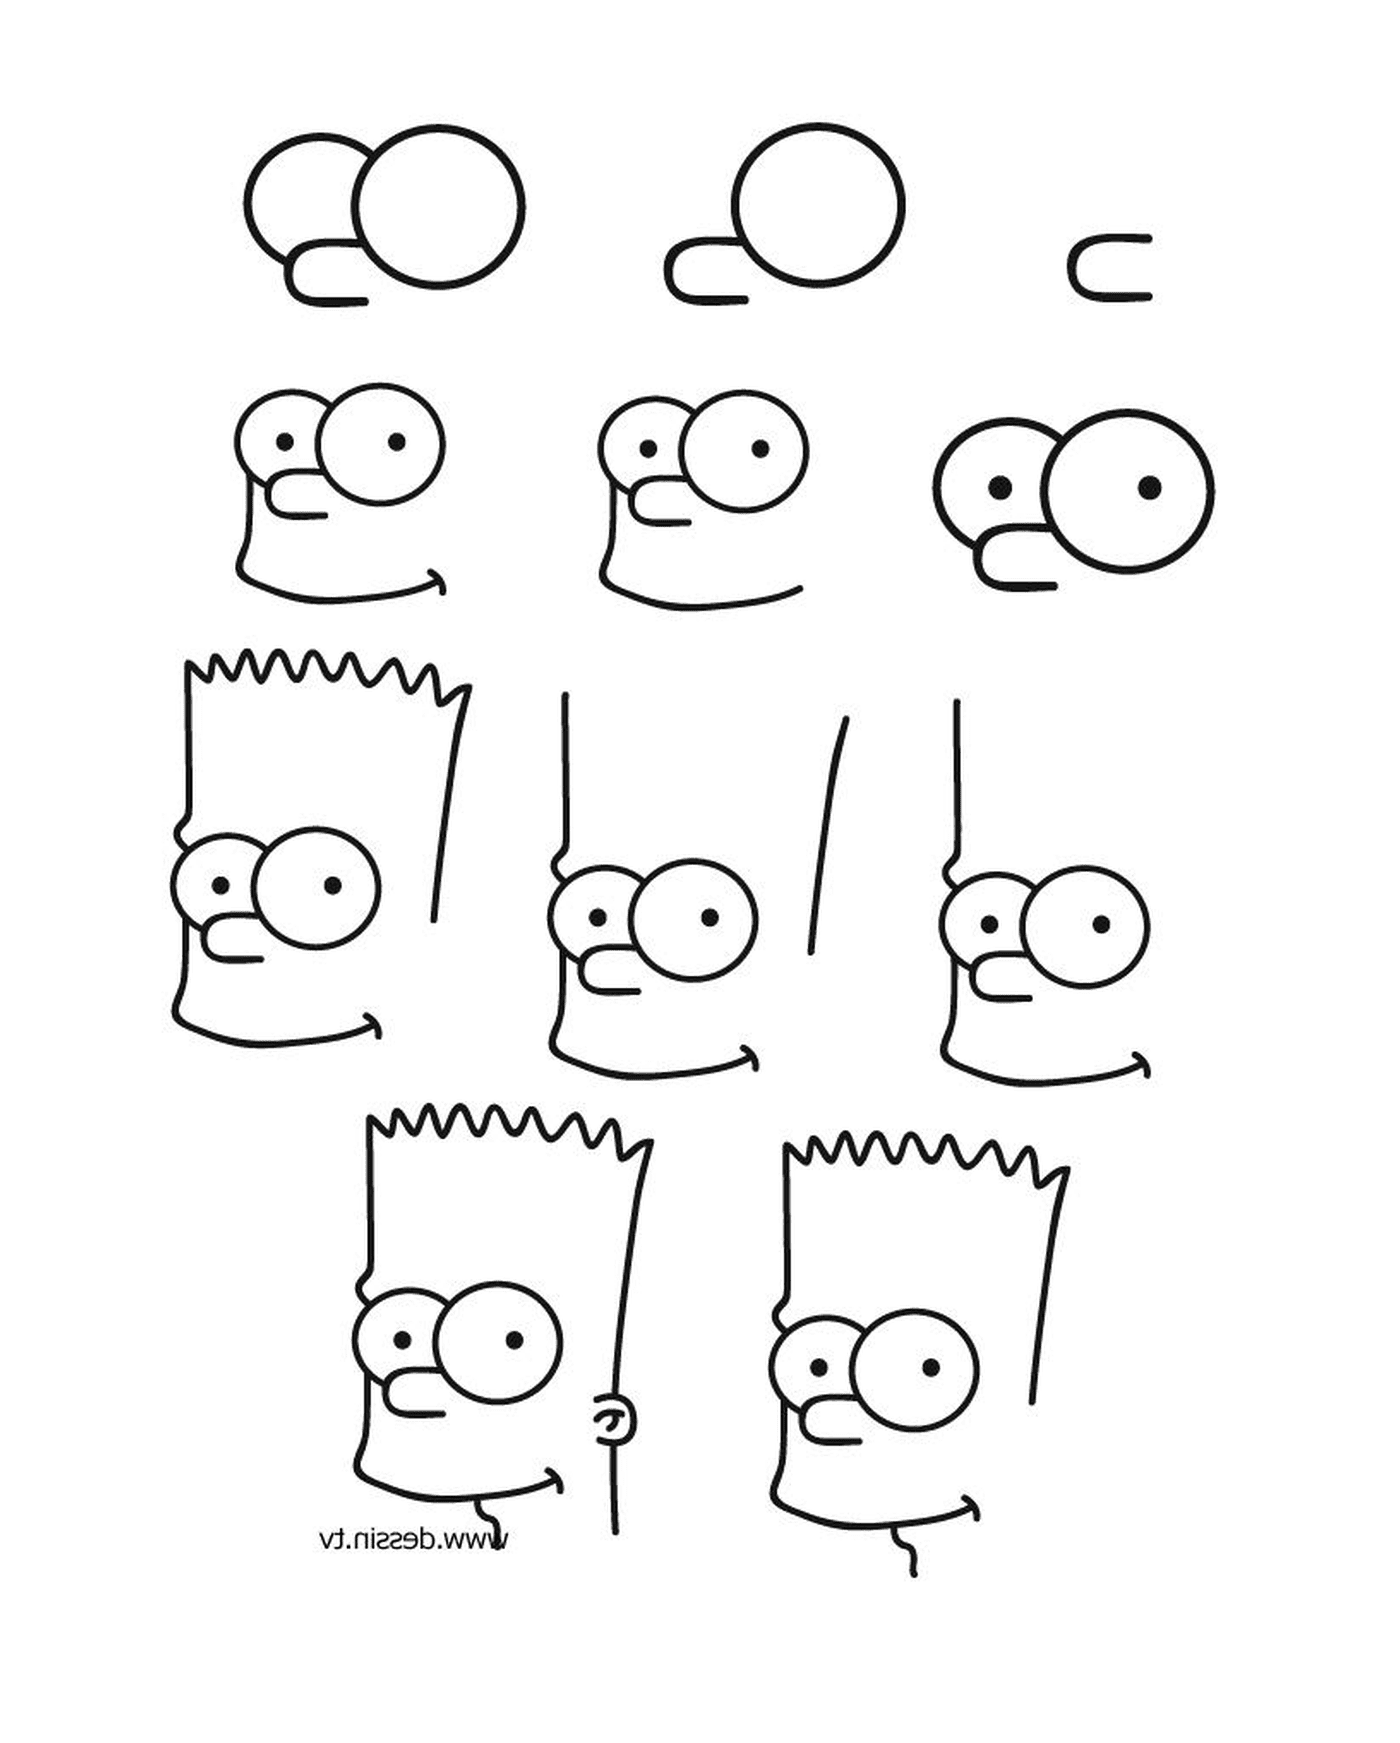  A variety of drawings by Bart Simpson 